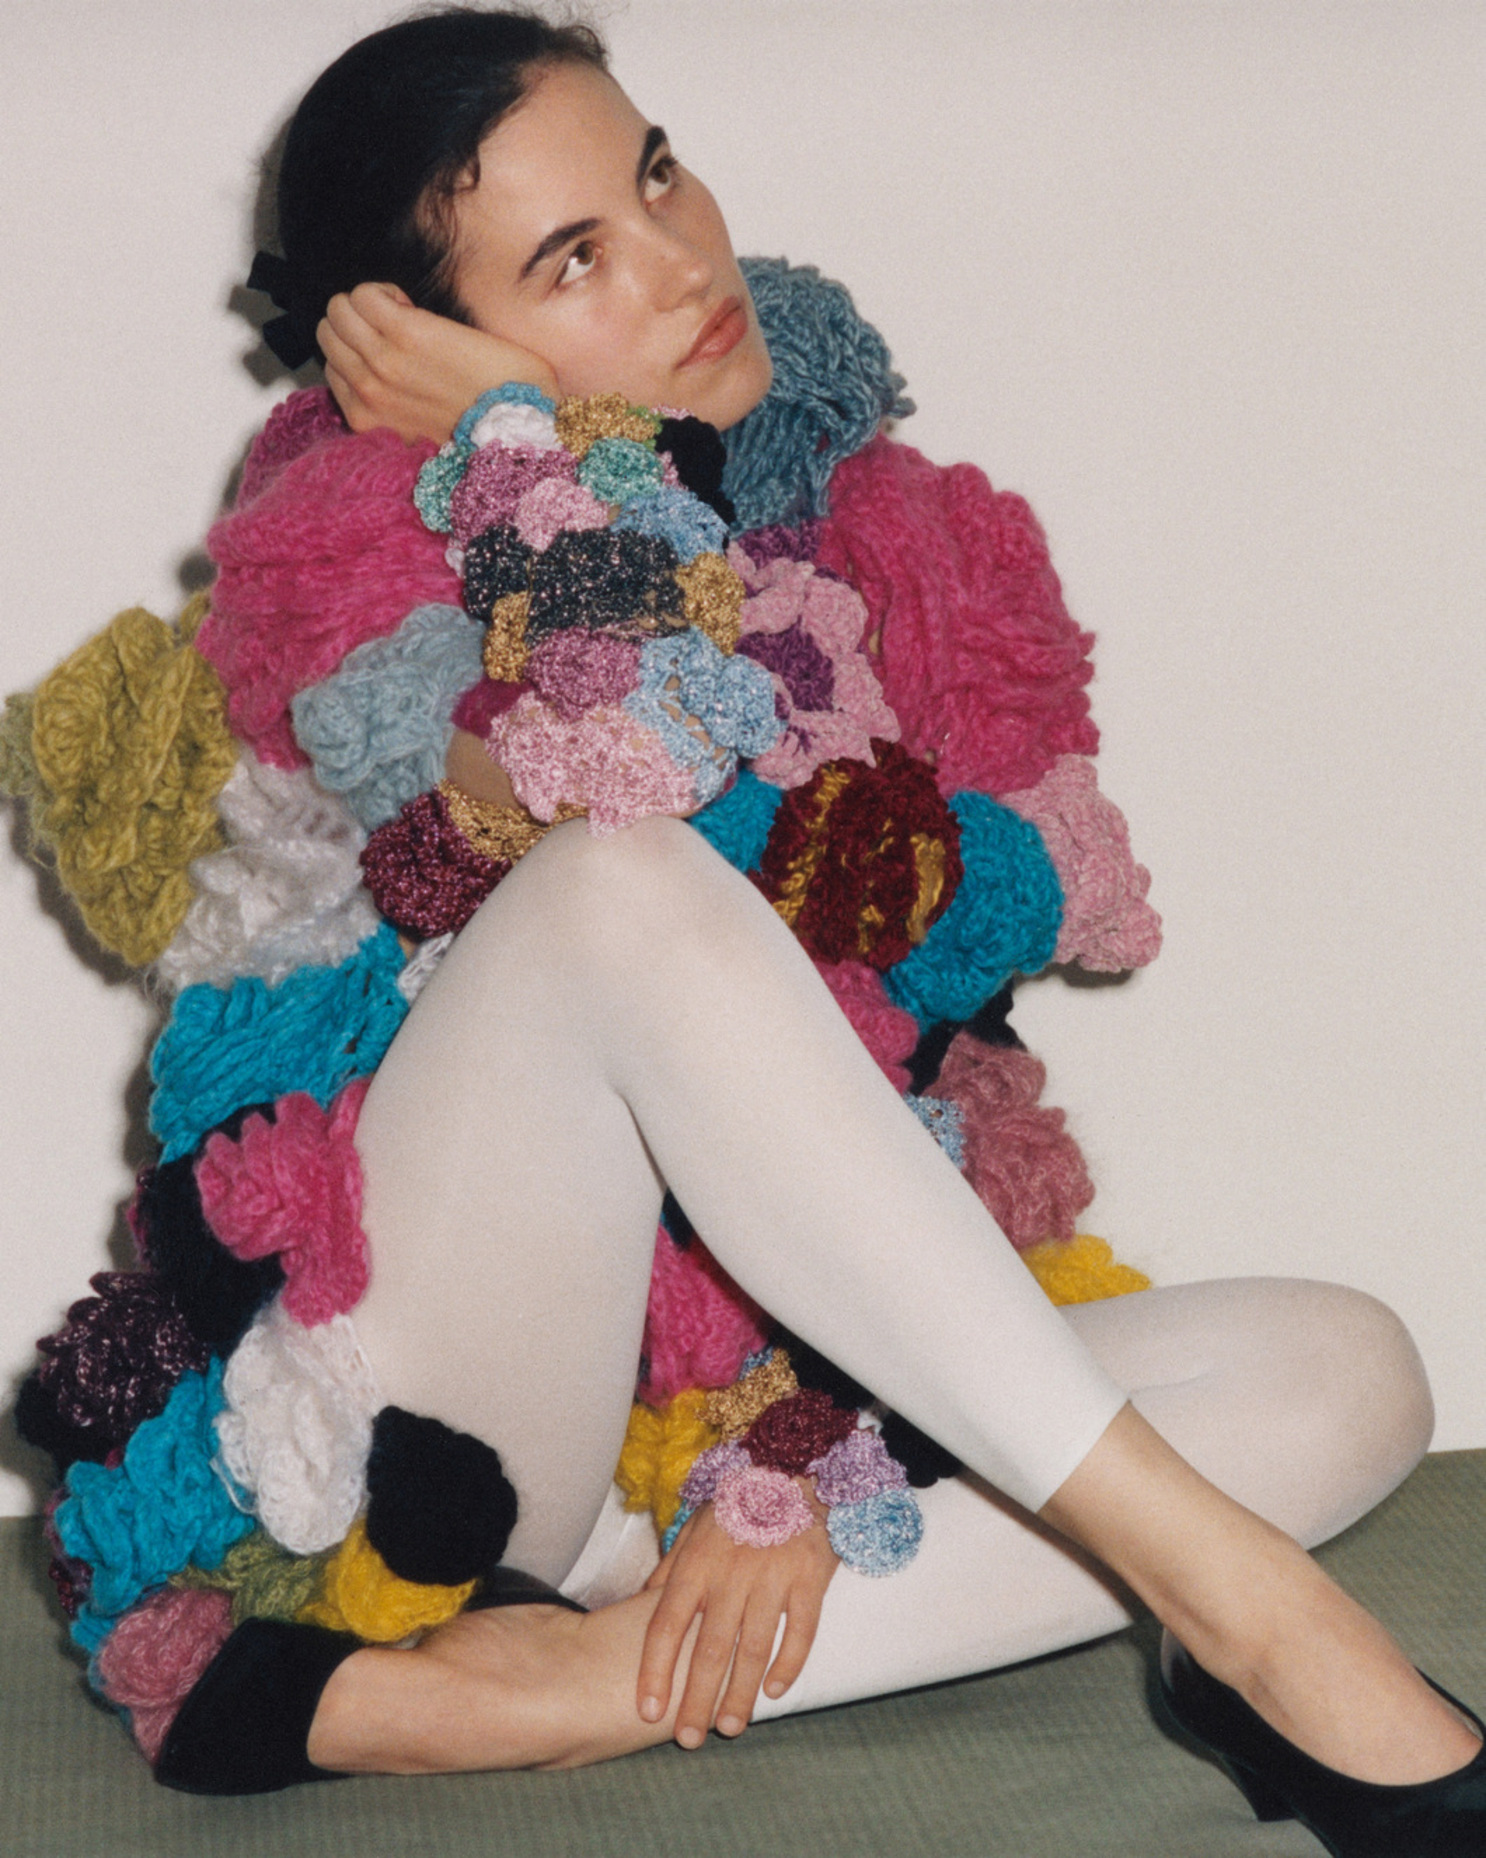 Katya Zelentsova on excessive knitwear and two-week trainrides